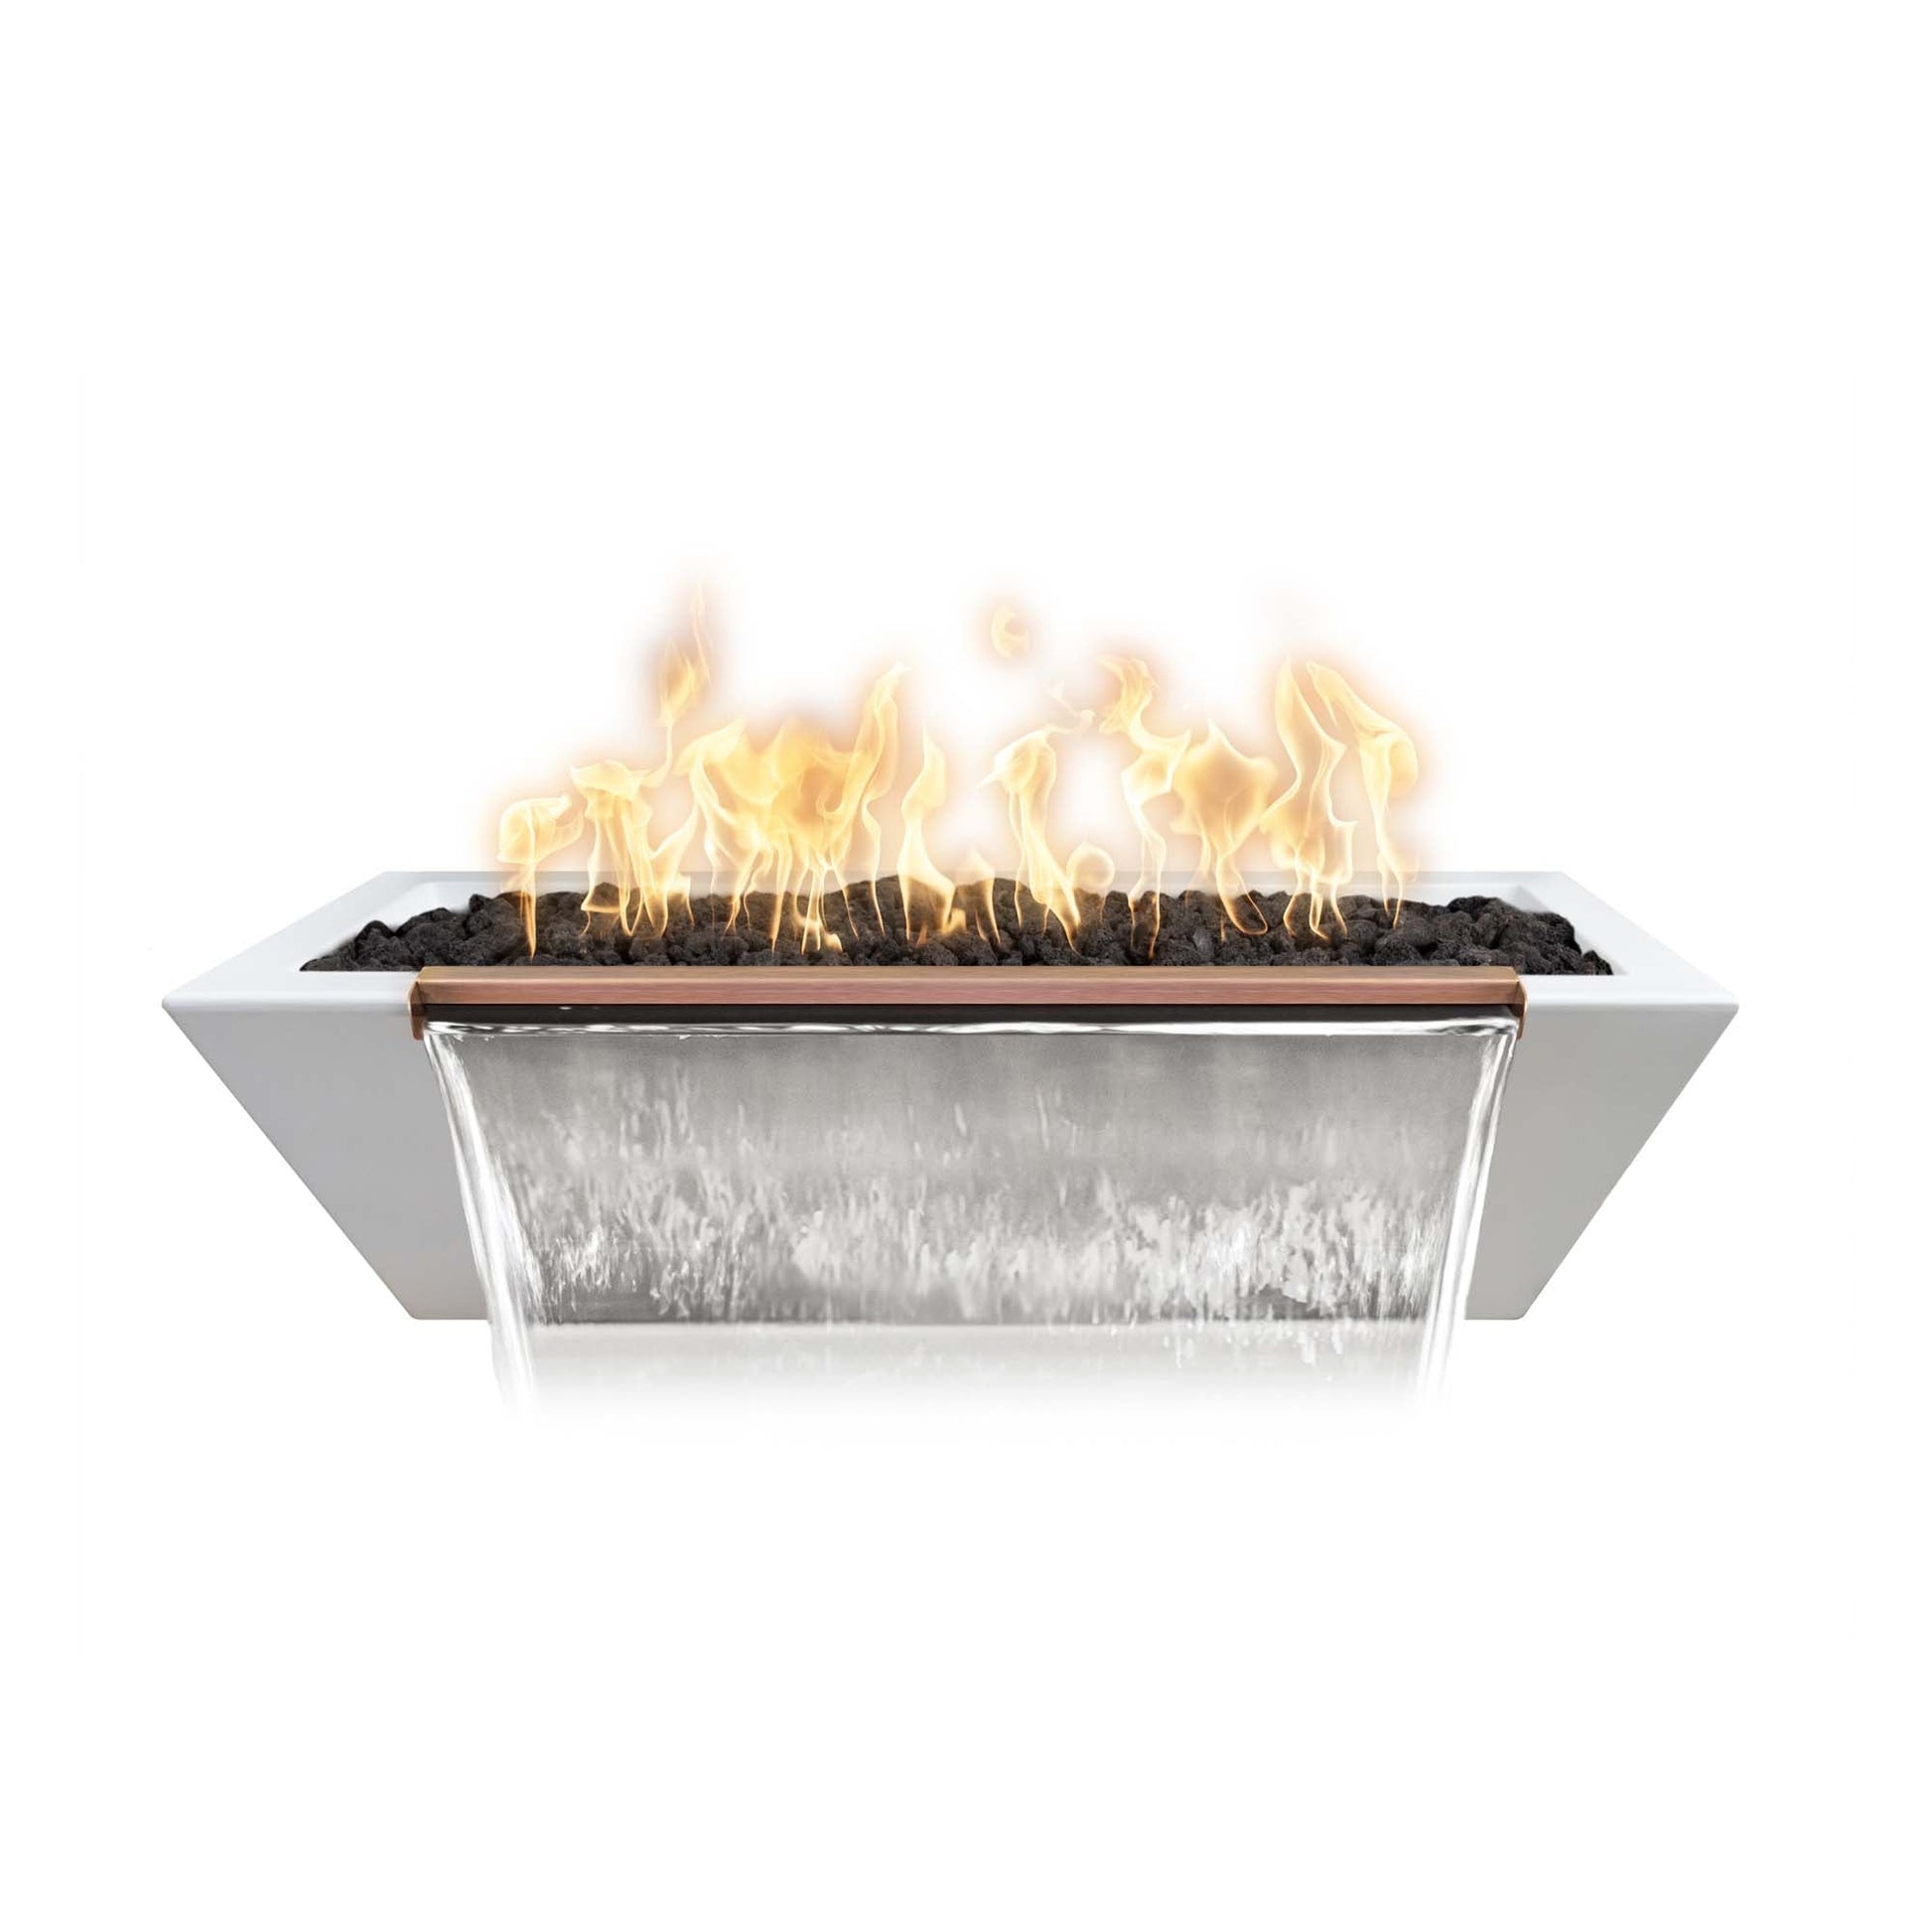 The Outdoor Plus Linear Maya 72" Metallic Slate GFRC Concrete Liquid Propane Fire & Water Bowl with 12V Electronic Ignition